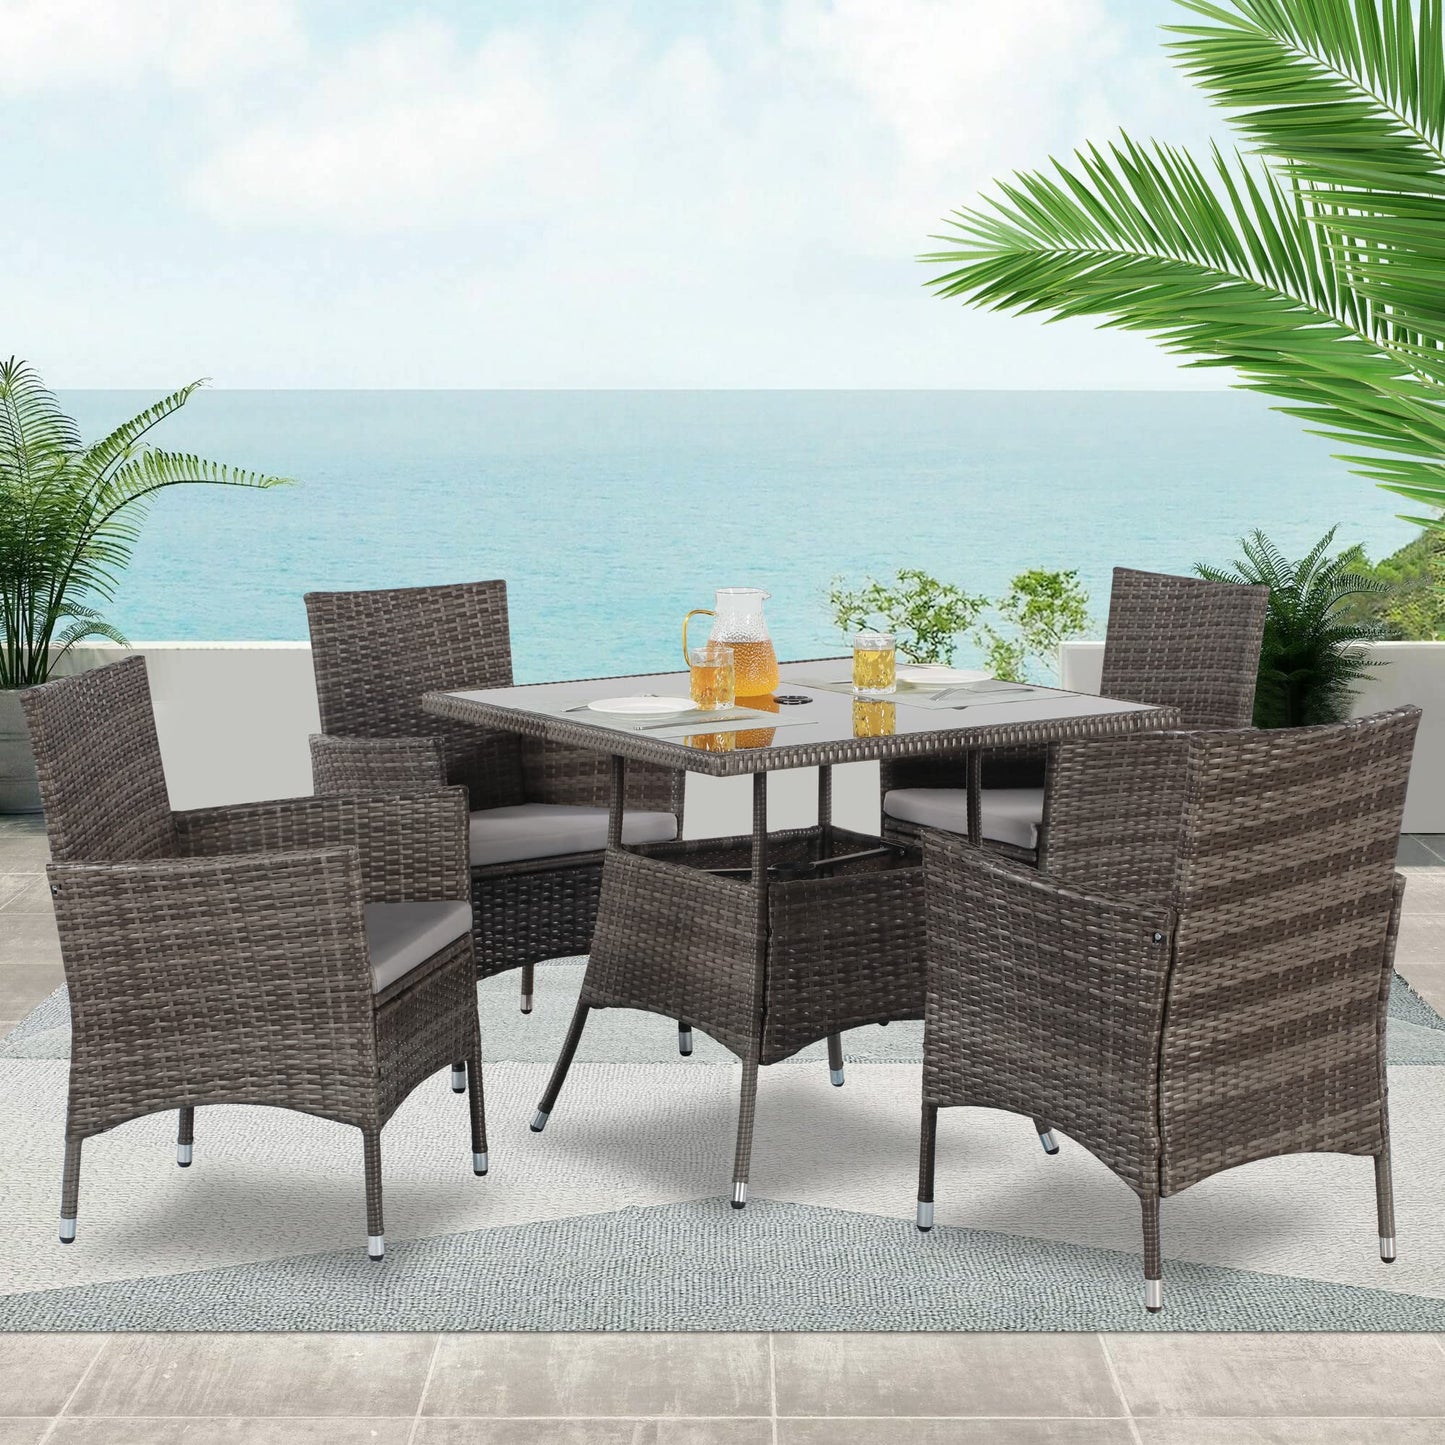 Wisteria Lane Patio Dining Set, 5-Piece Wicker Outdoor Table and Chairs Set for 4, Square Tempered Glass Table Top with Umbrella Hole, Rattan Outdoor Furniture Set for Backyard Deck, Grey